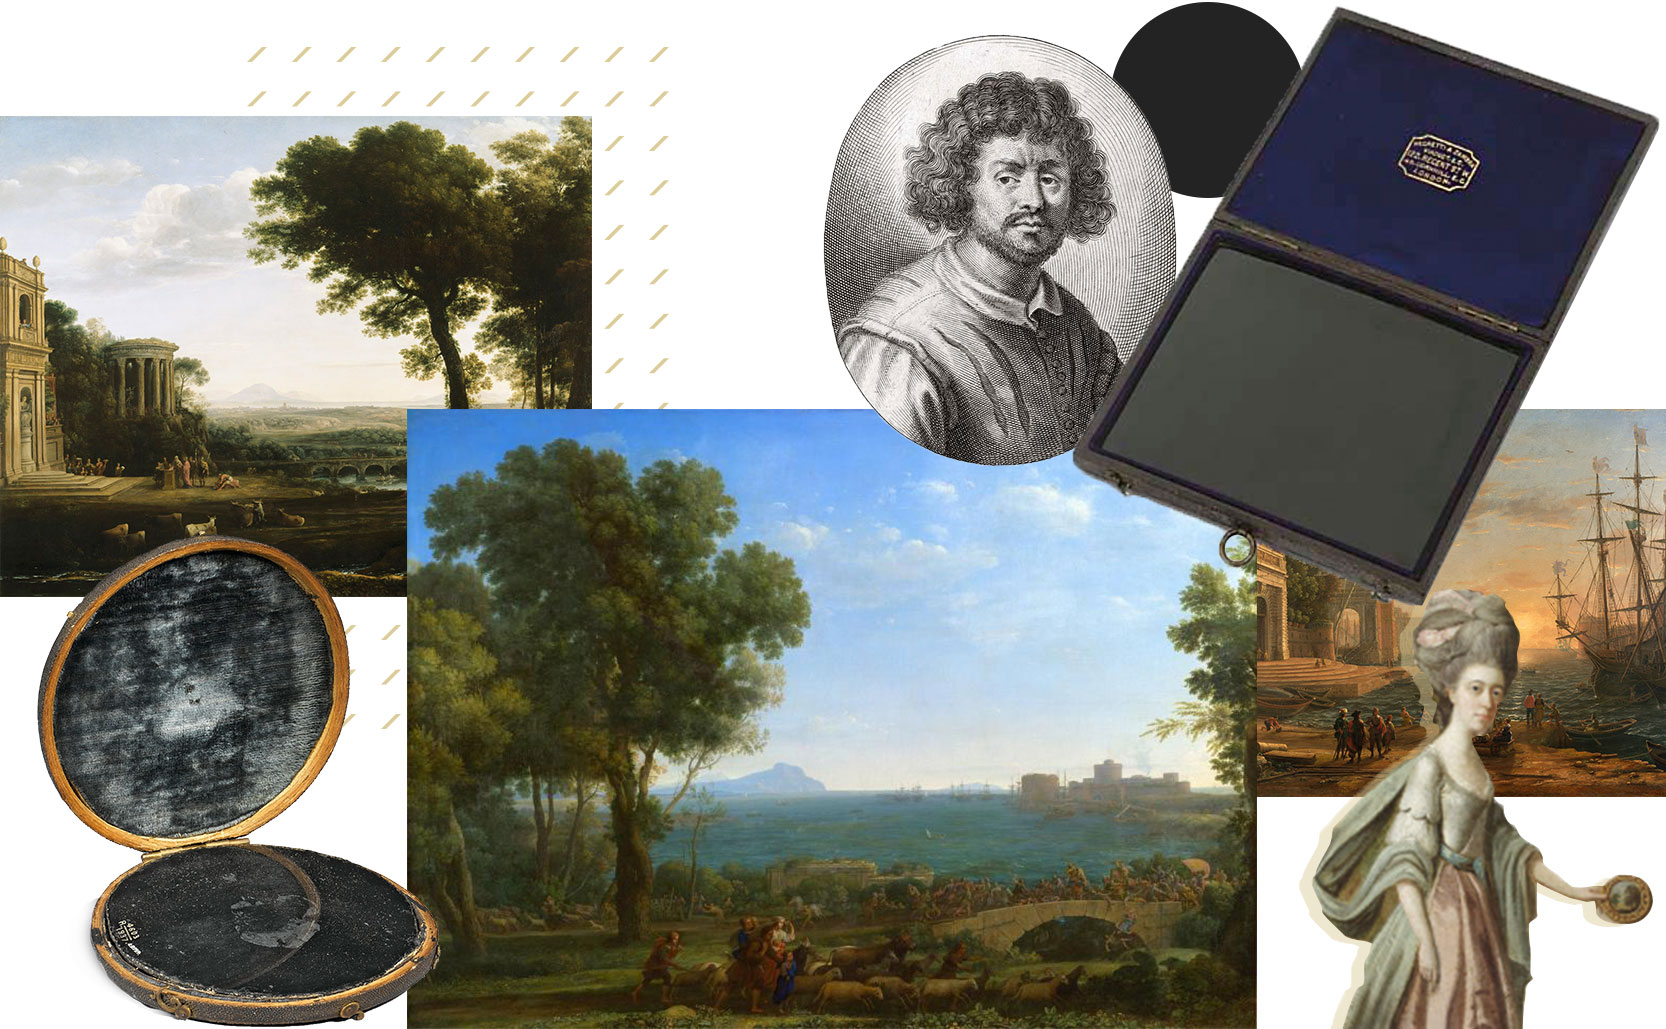 Claude glass got it's name from the soft light landscapes of French painter Claude Lorrain